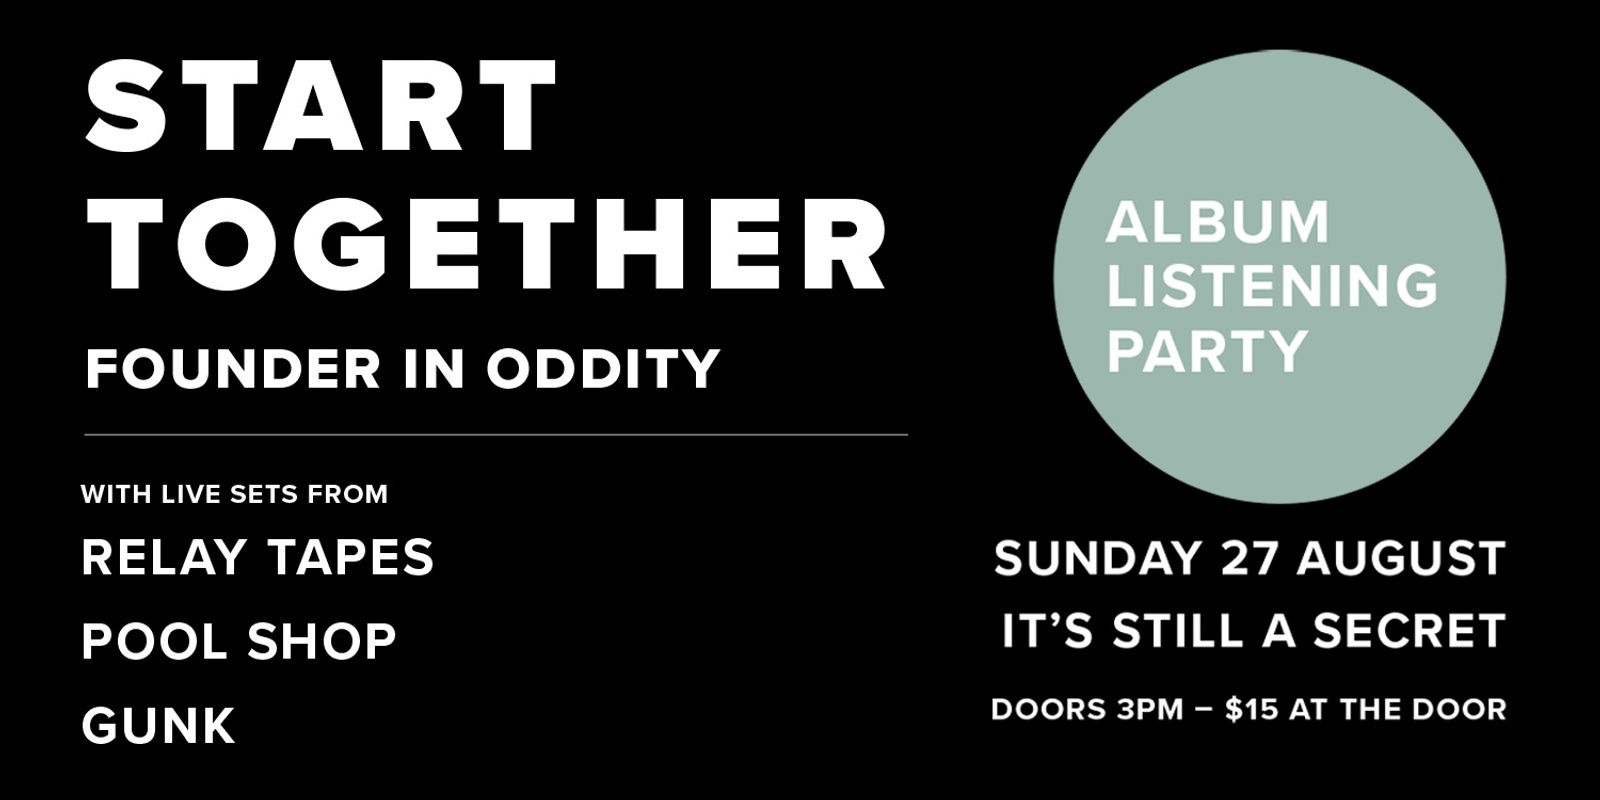 Banner image for Start Together album listening party with Pool Shop, Relay Tapes & GUNK live 